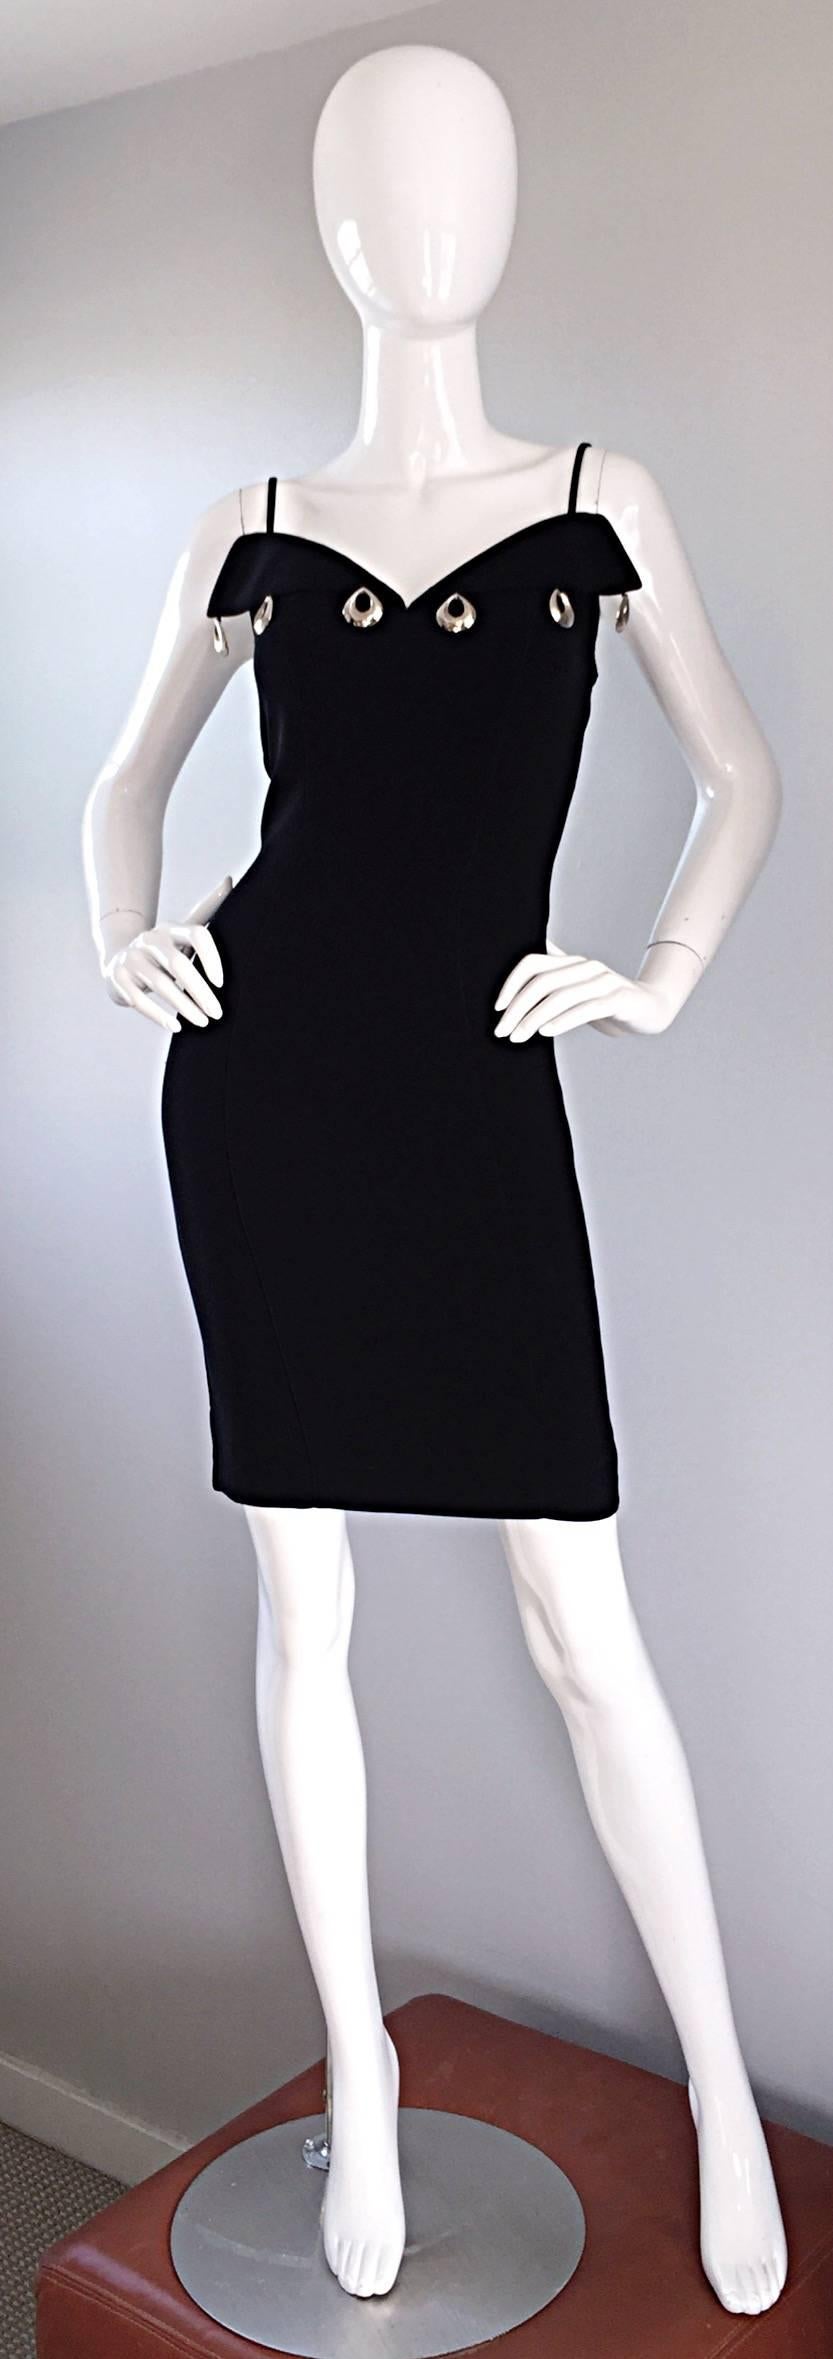 Sexy vintage 1990s THIERRY MUGLER black bodycon dress! Not just your average little black dress! Impeccable tailoring that Mugler was renowned for. Silver dangling hoops adorn the bust. Silk velvet panels down each side of the dress. A timeless